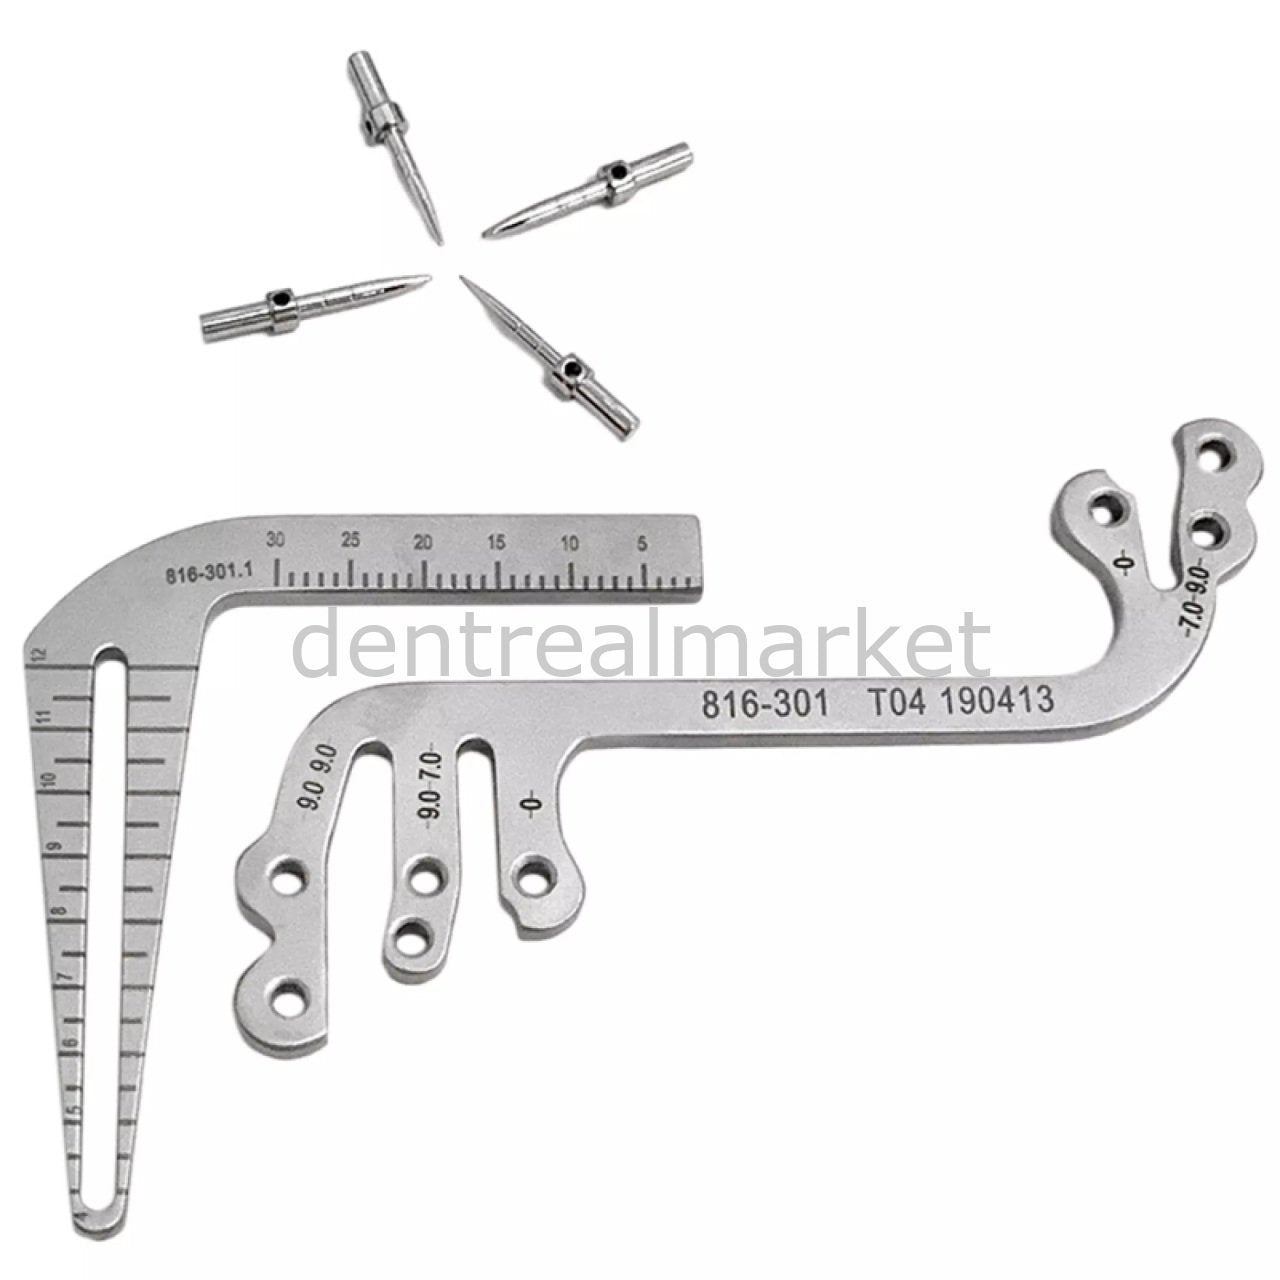 DentrealStore - Dentreal Parallel Implant Guide - Parallel Implant Placement